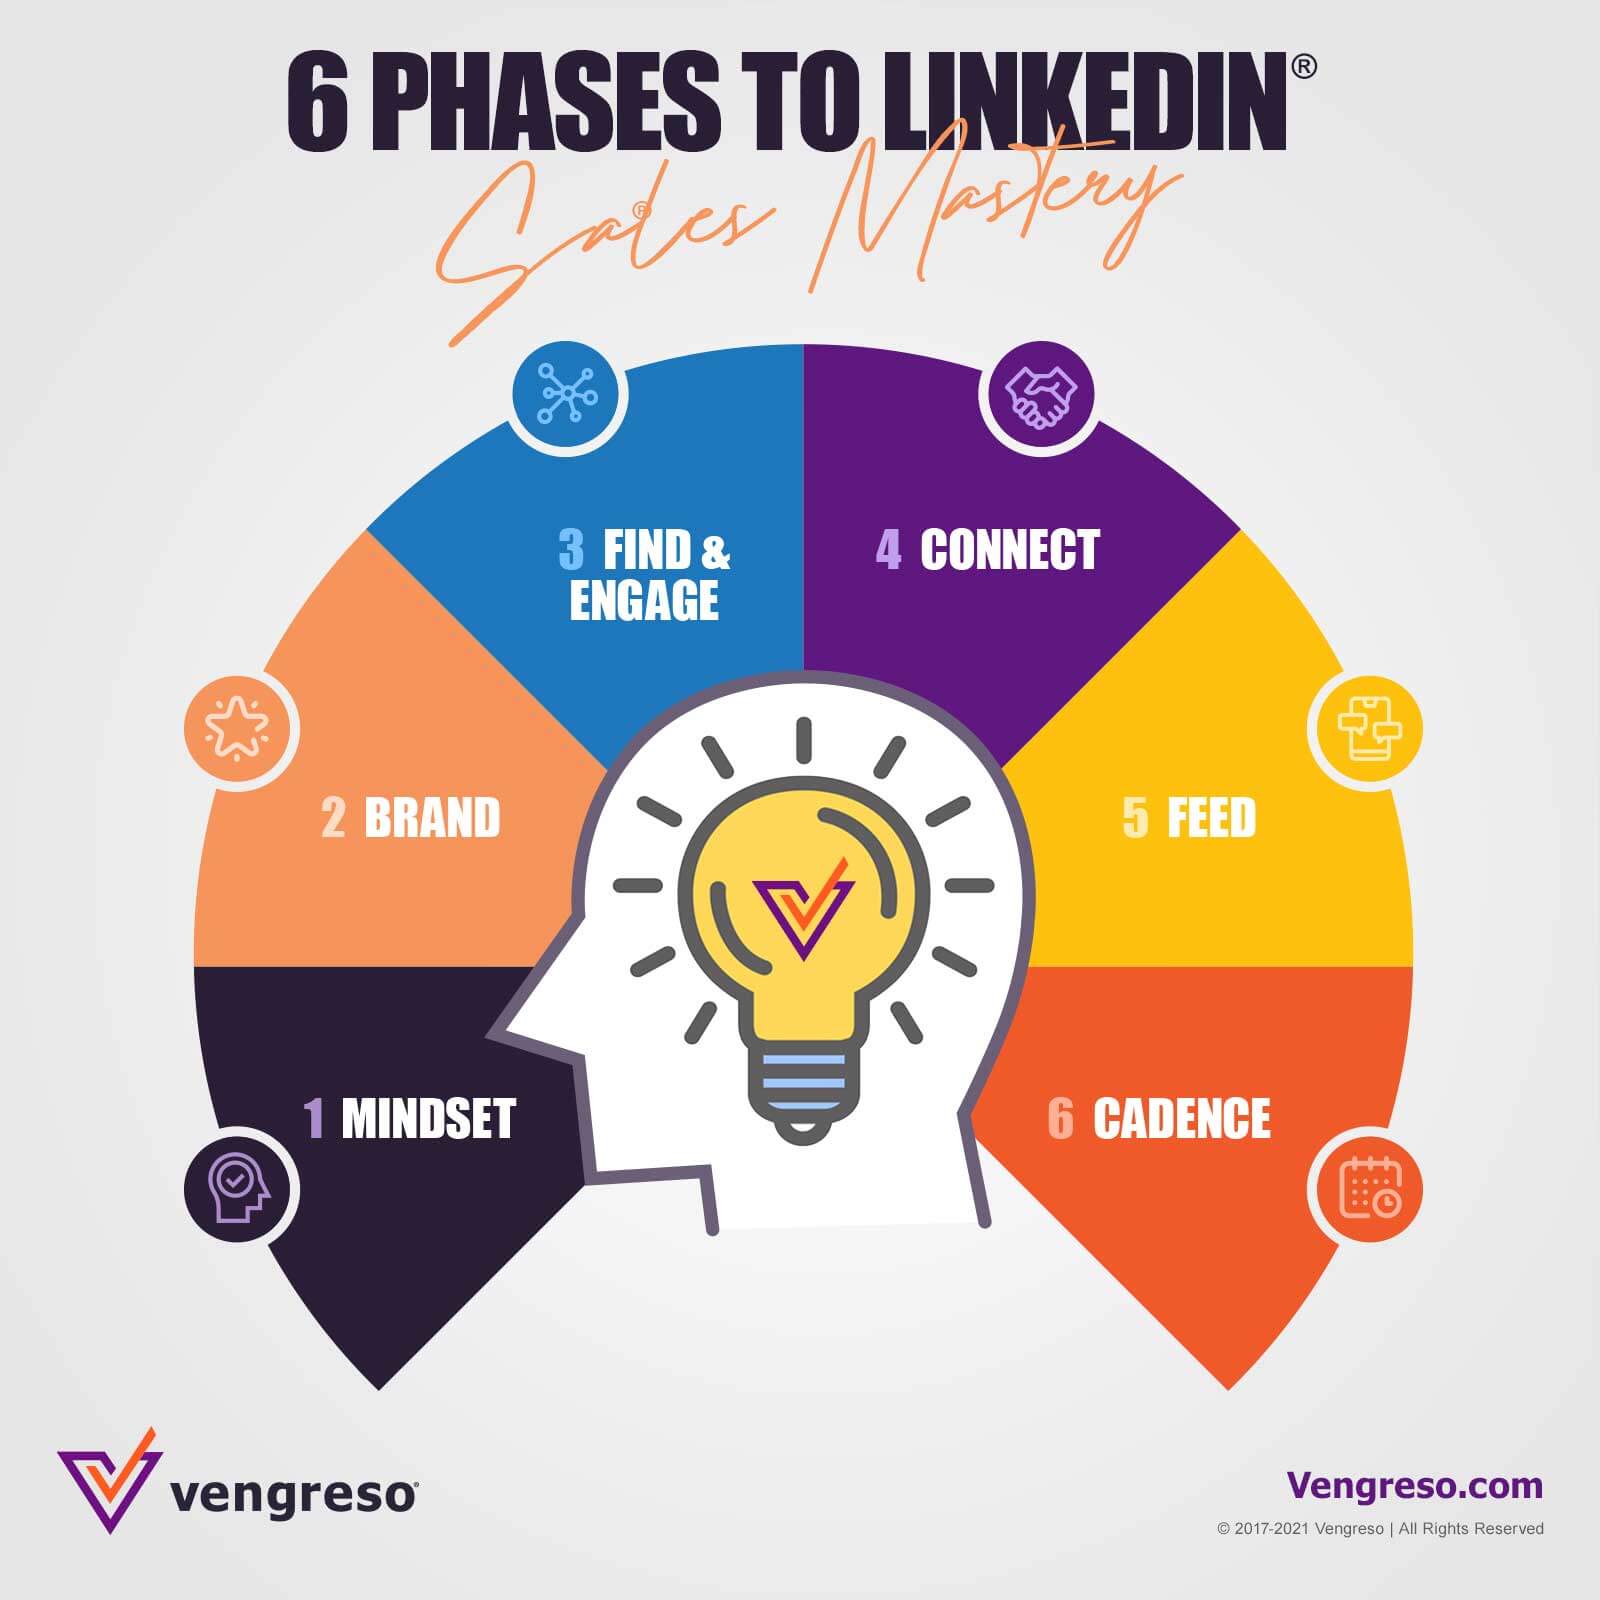 6 Phases to LinkedIn Sales Mastery